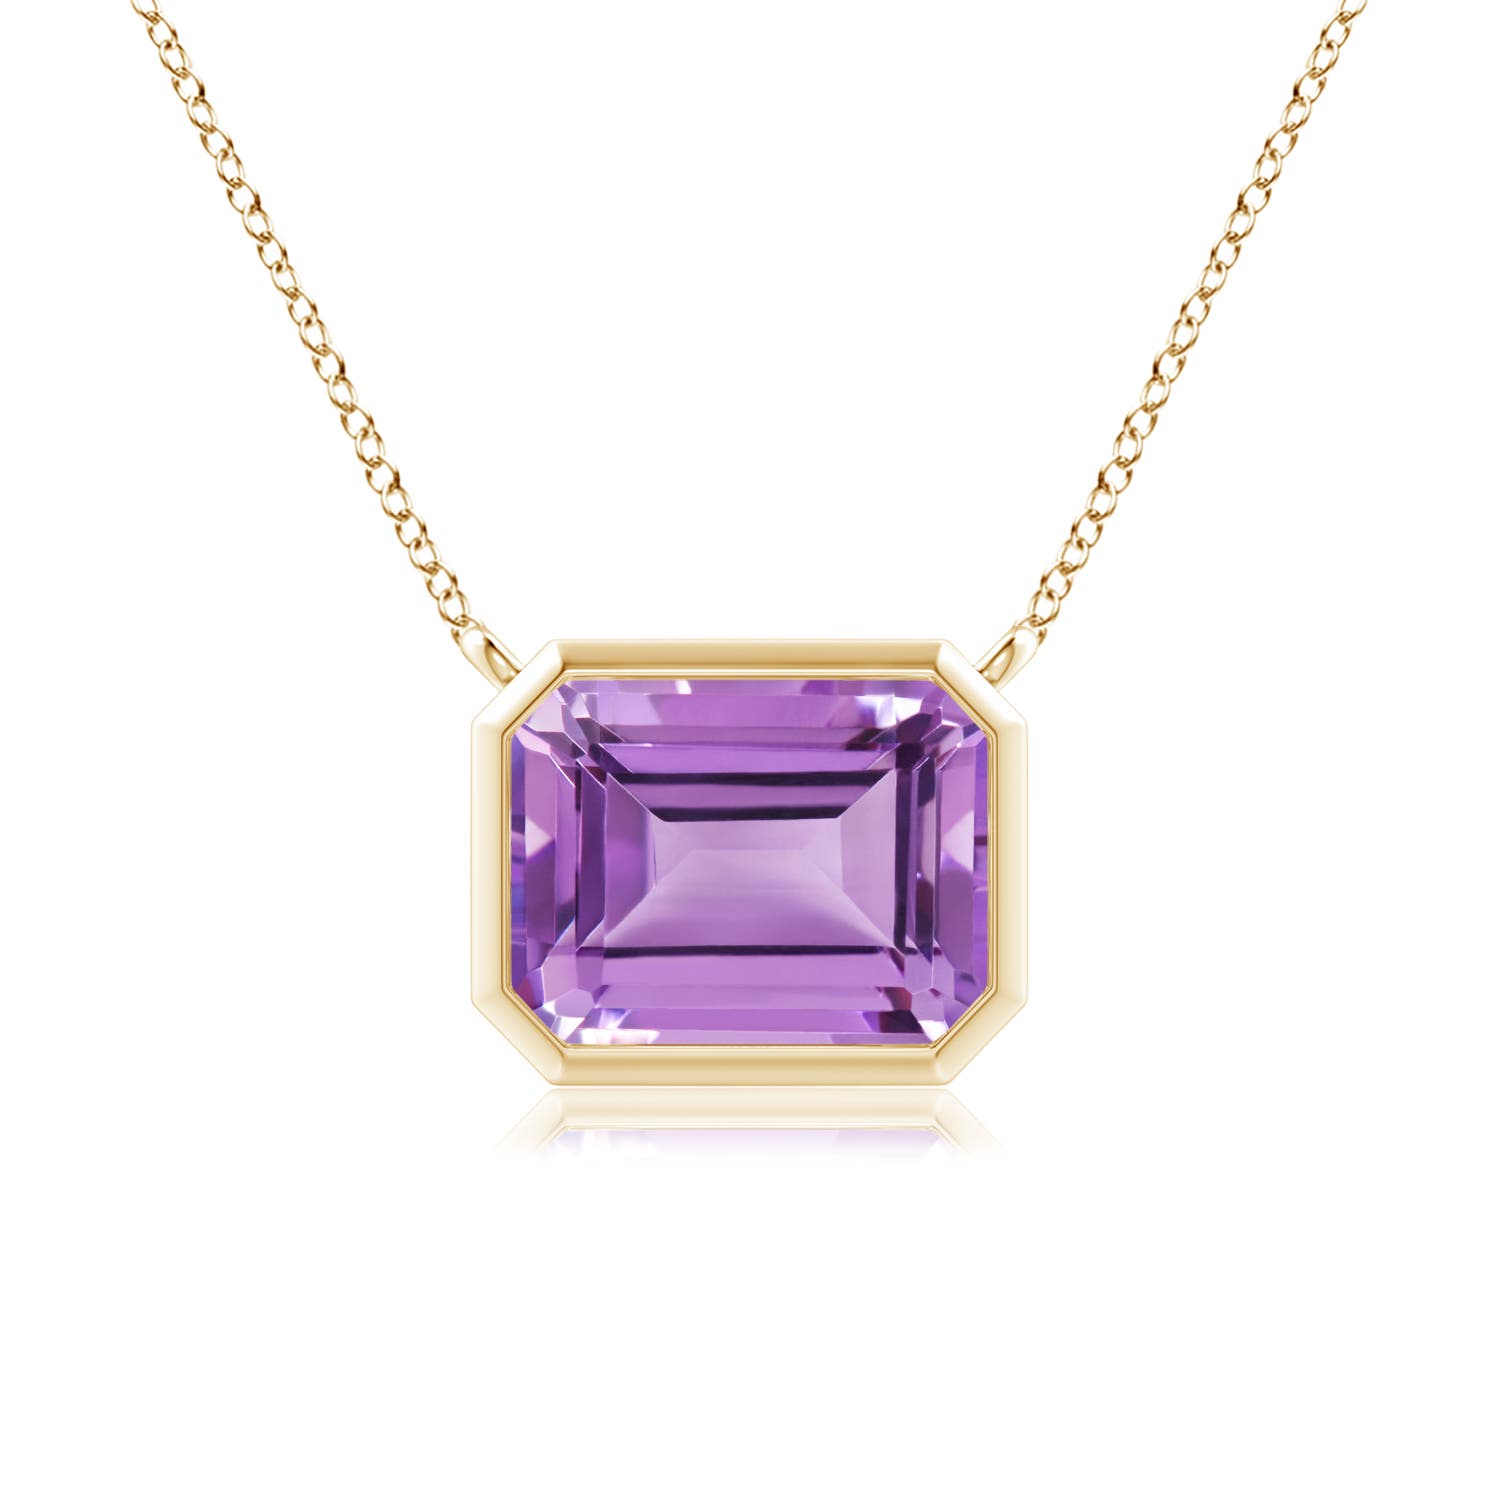 A - Amethyst / 2.2 CT / 14 KT Yellow Gold